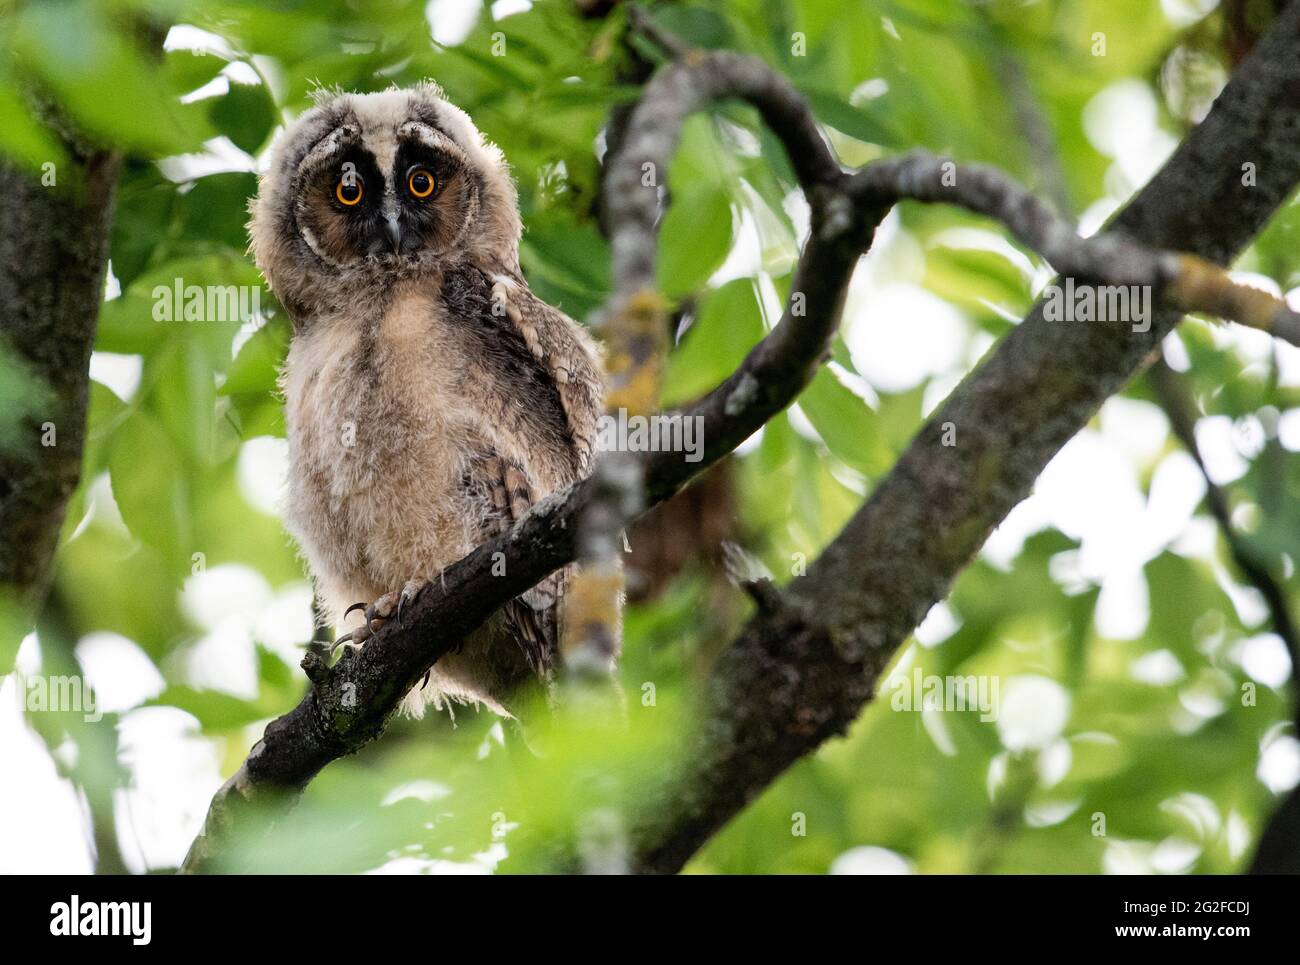 10 June 2021, Berlin: A young long-eared owl sits in a tree in the Fliegersiedlung in Tempelhof. In Berlin long-eared owls hunt and breed mainly near large open spaces, for example the Tempelhofer Feld, where they find good hunting conditions and an abundant supply of mice. Photo: Bernd von Jutrczenka/dpa Stock Photo